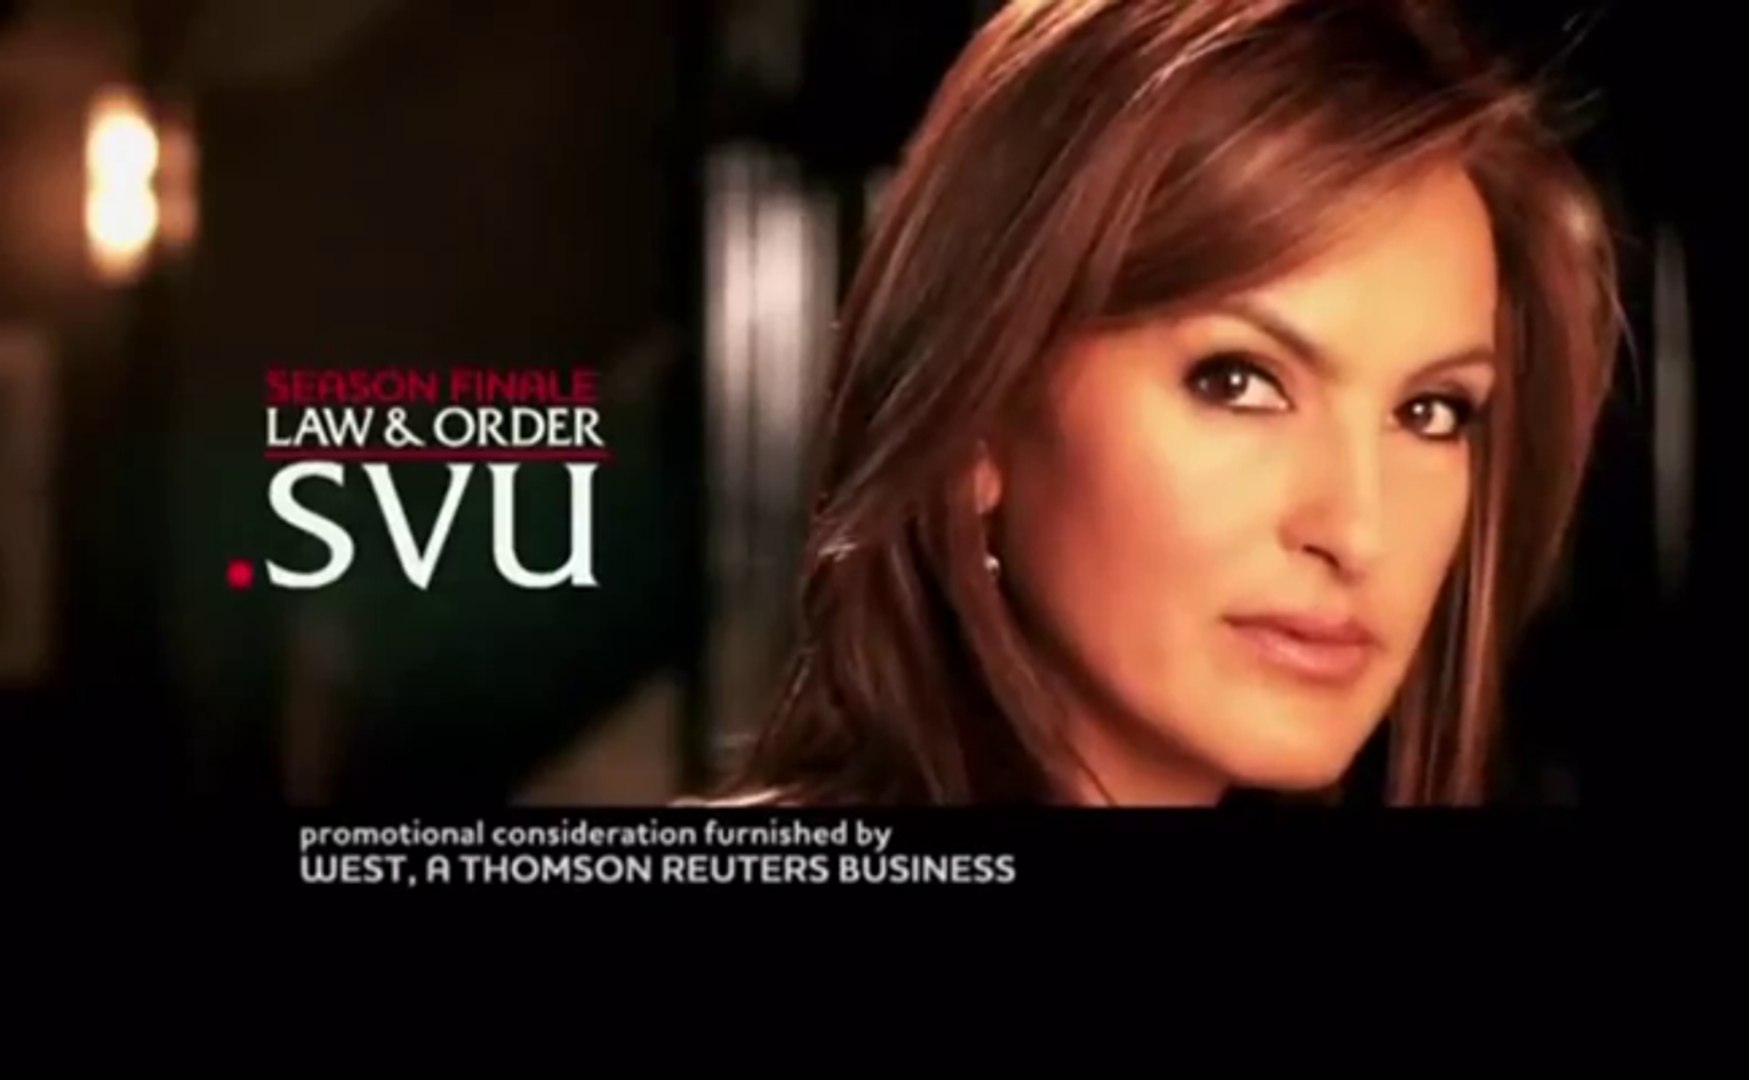 law and order svu 21 streaming eng.